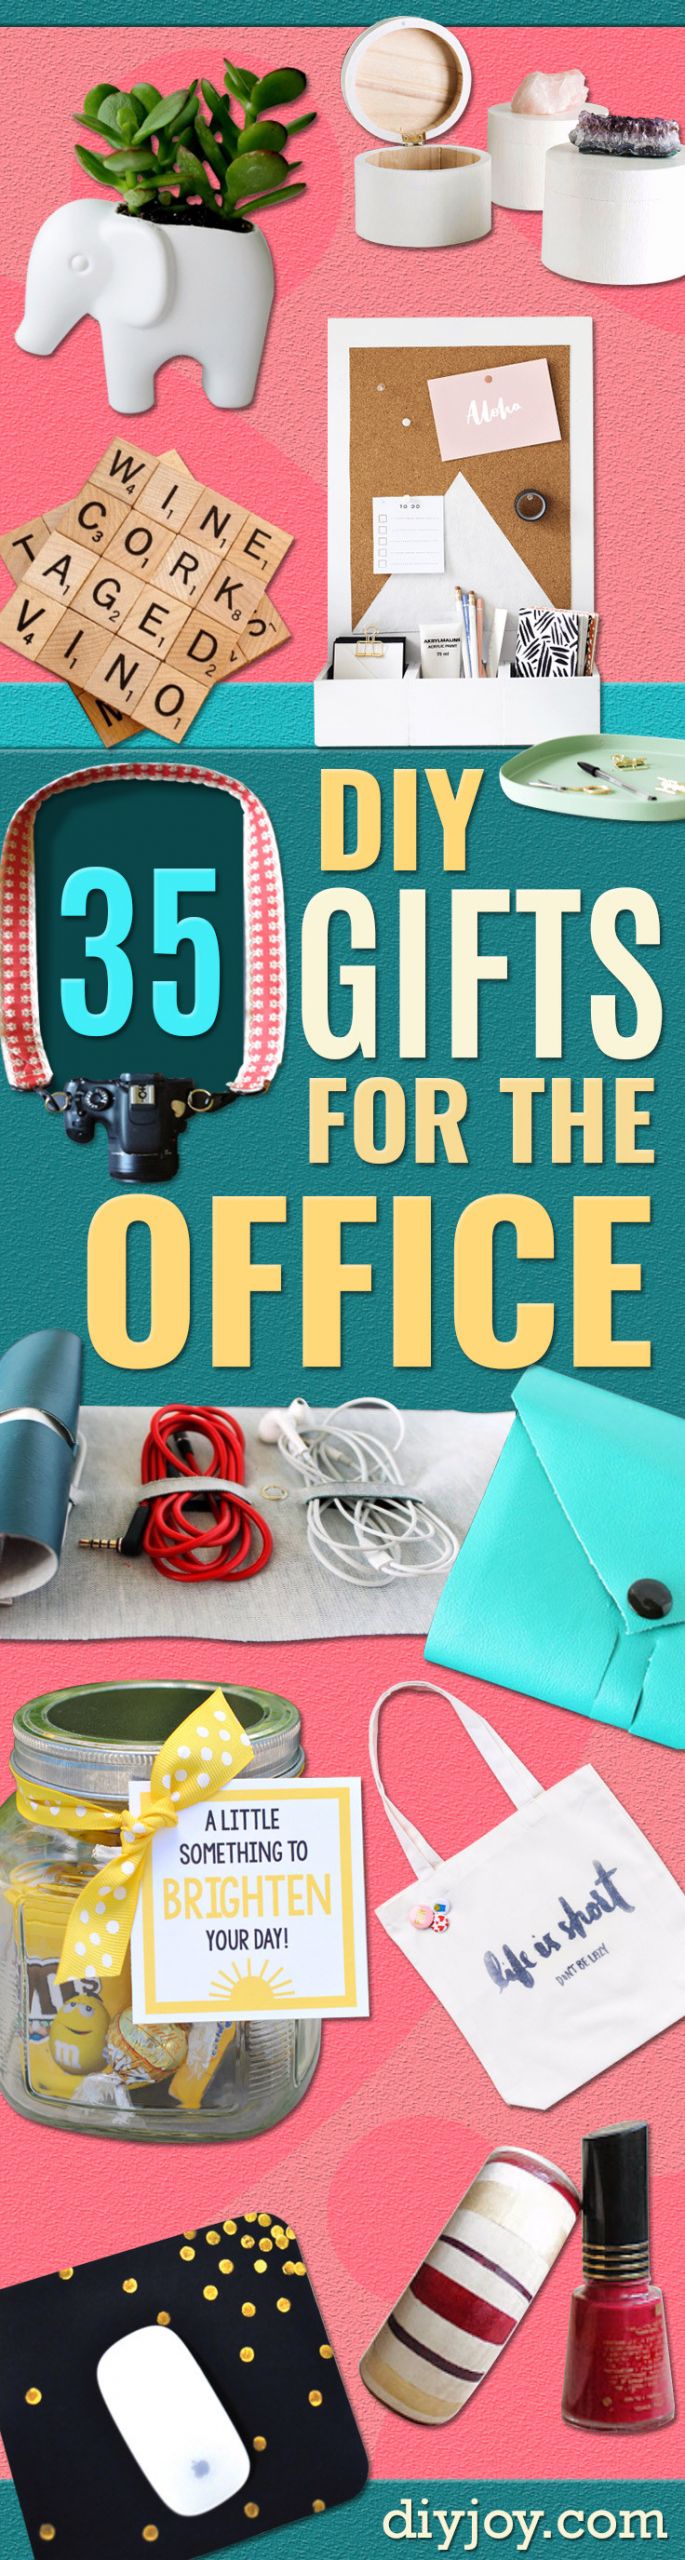 Gift Ideas For Office Christmas Party
 35 Cheap and Easy Gifts for The fice